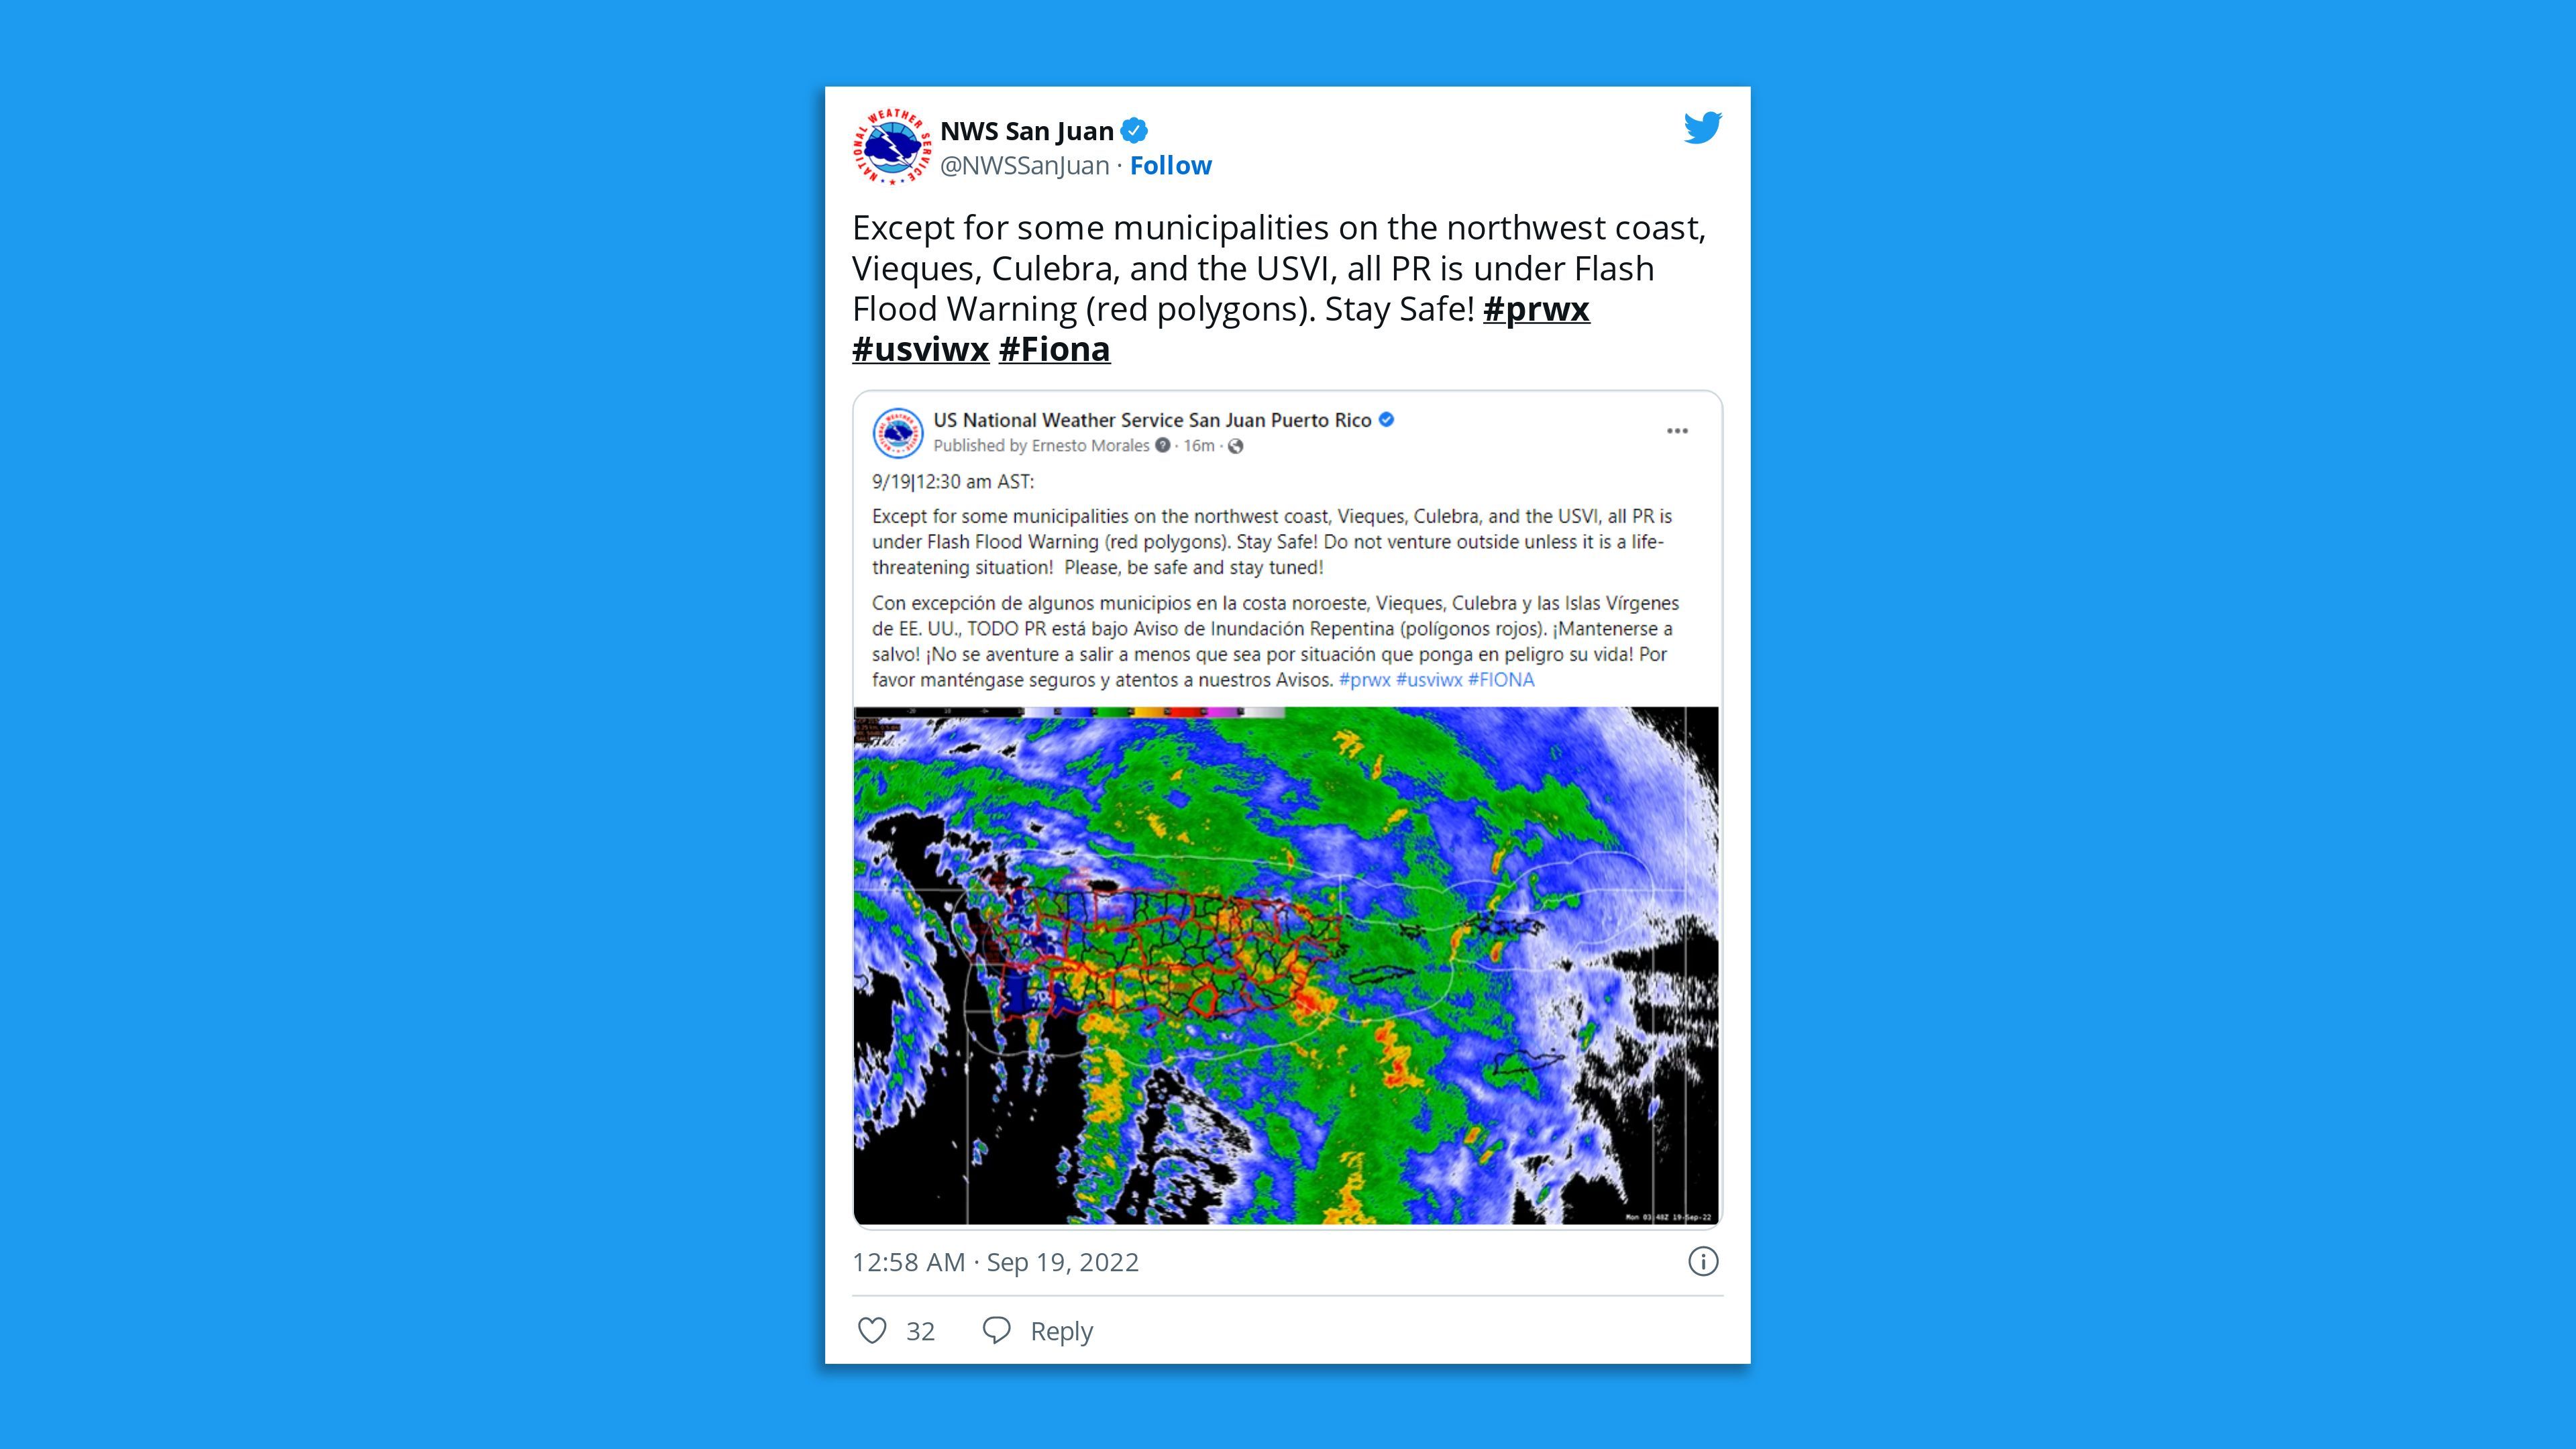 A tweet from the National Weather Service said all of Puerto Rico was under a flash flood warning except the Northeast.